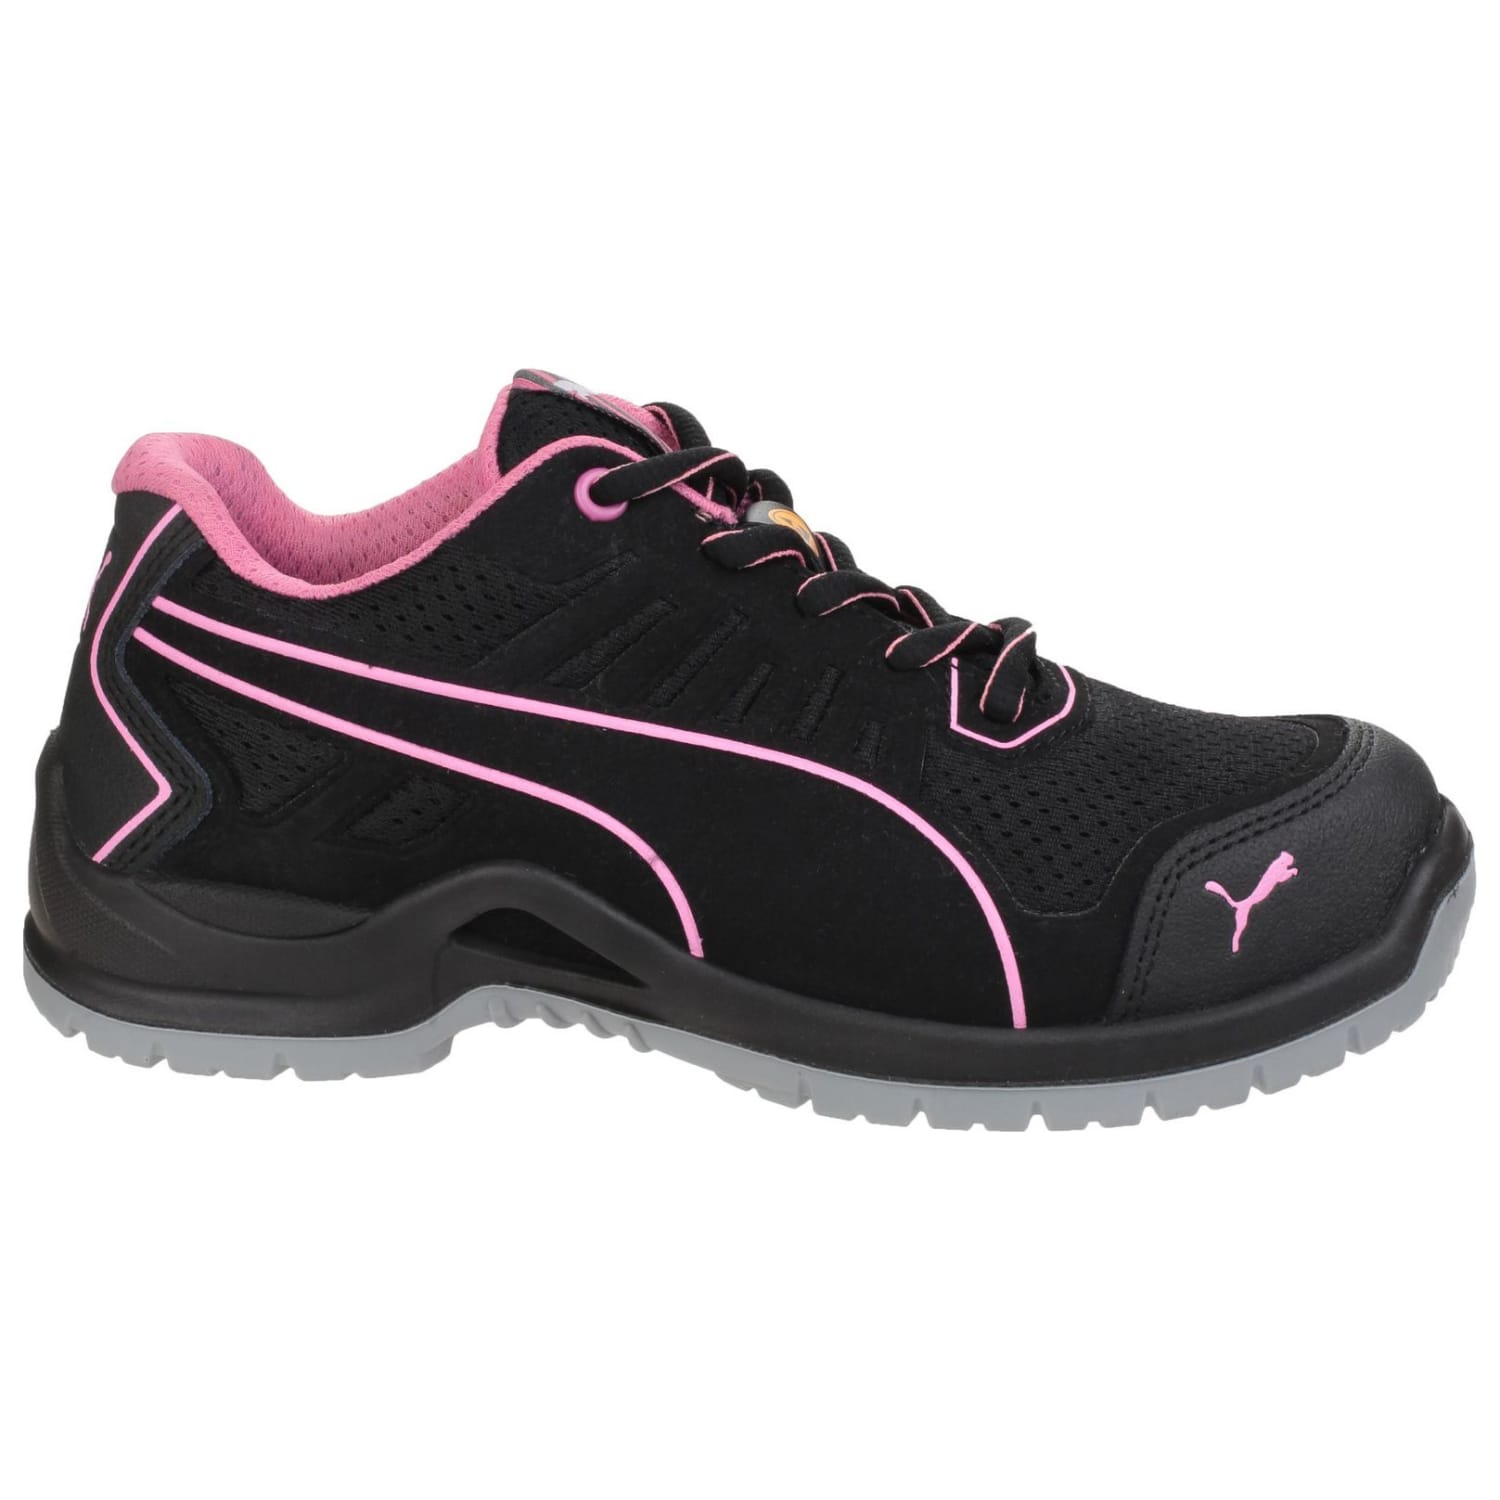 Puma Fuse Technic 644110 Womens Safety Trainers - | Wickes.co.uk